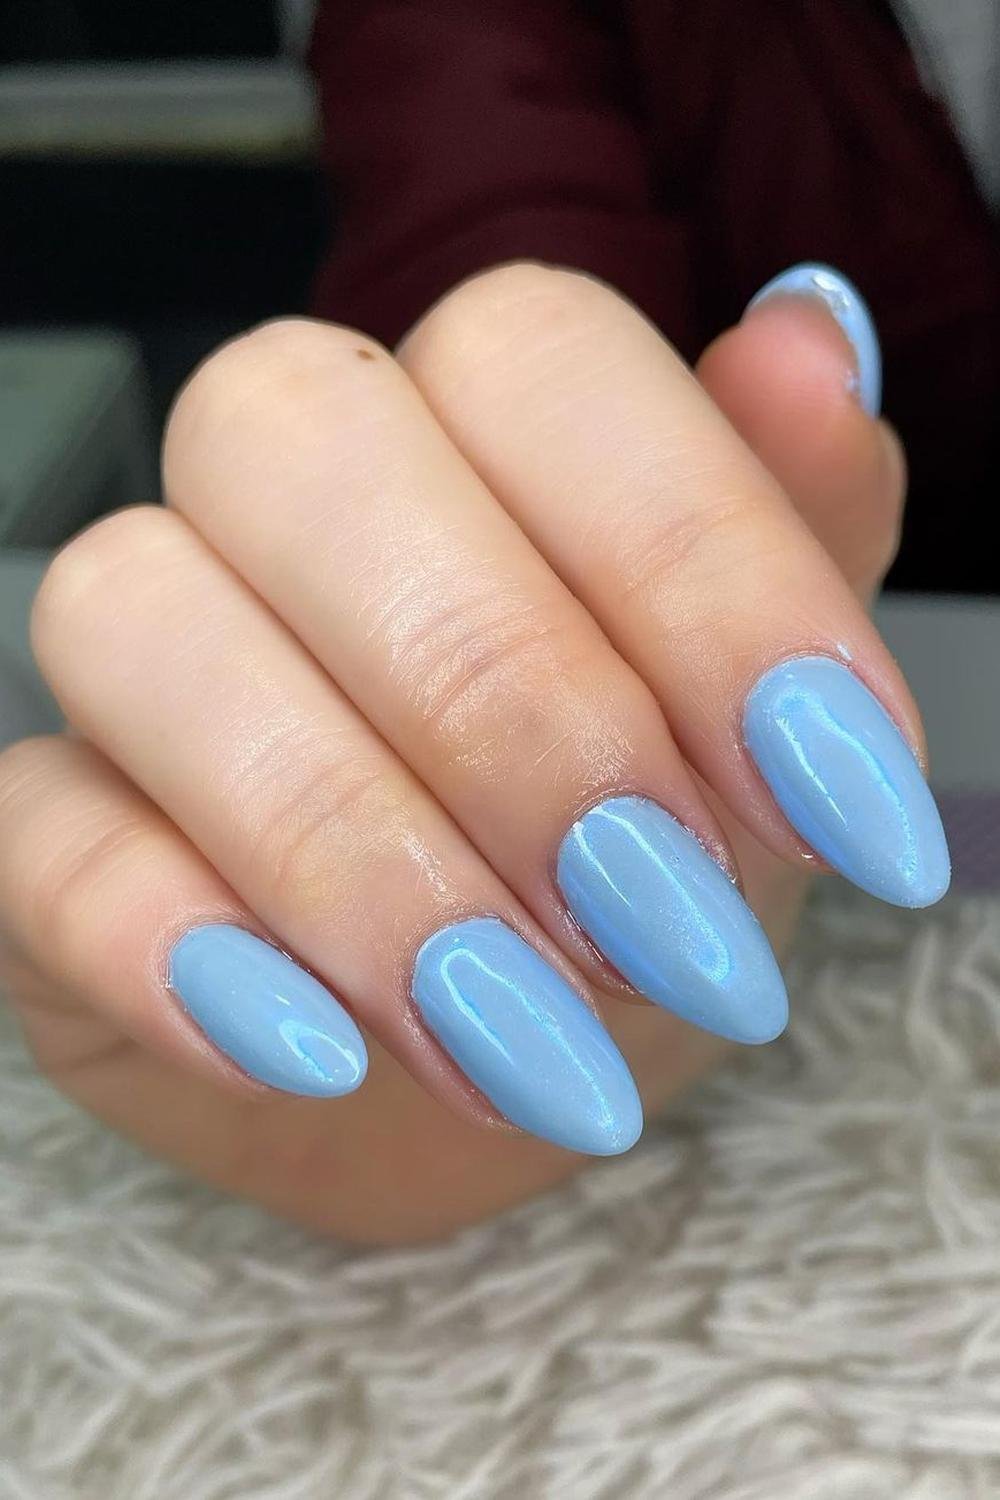 22 - Picture of Blue Chrome Nails